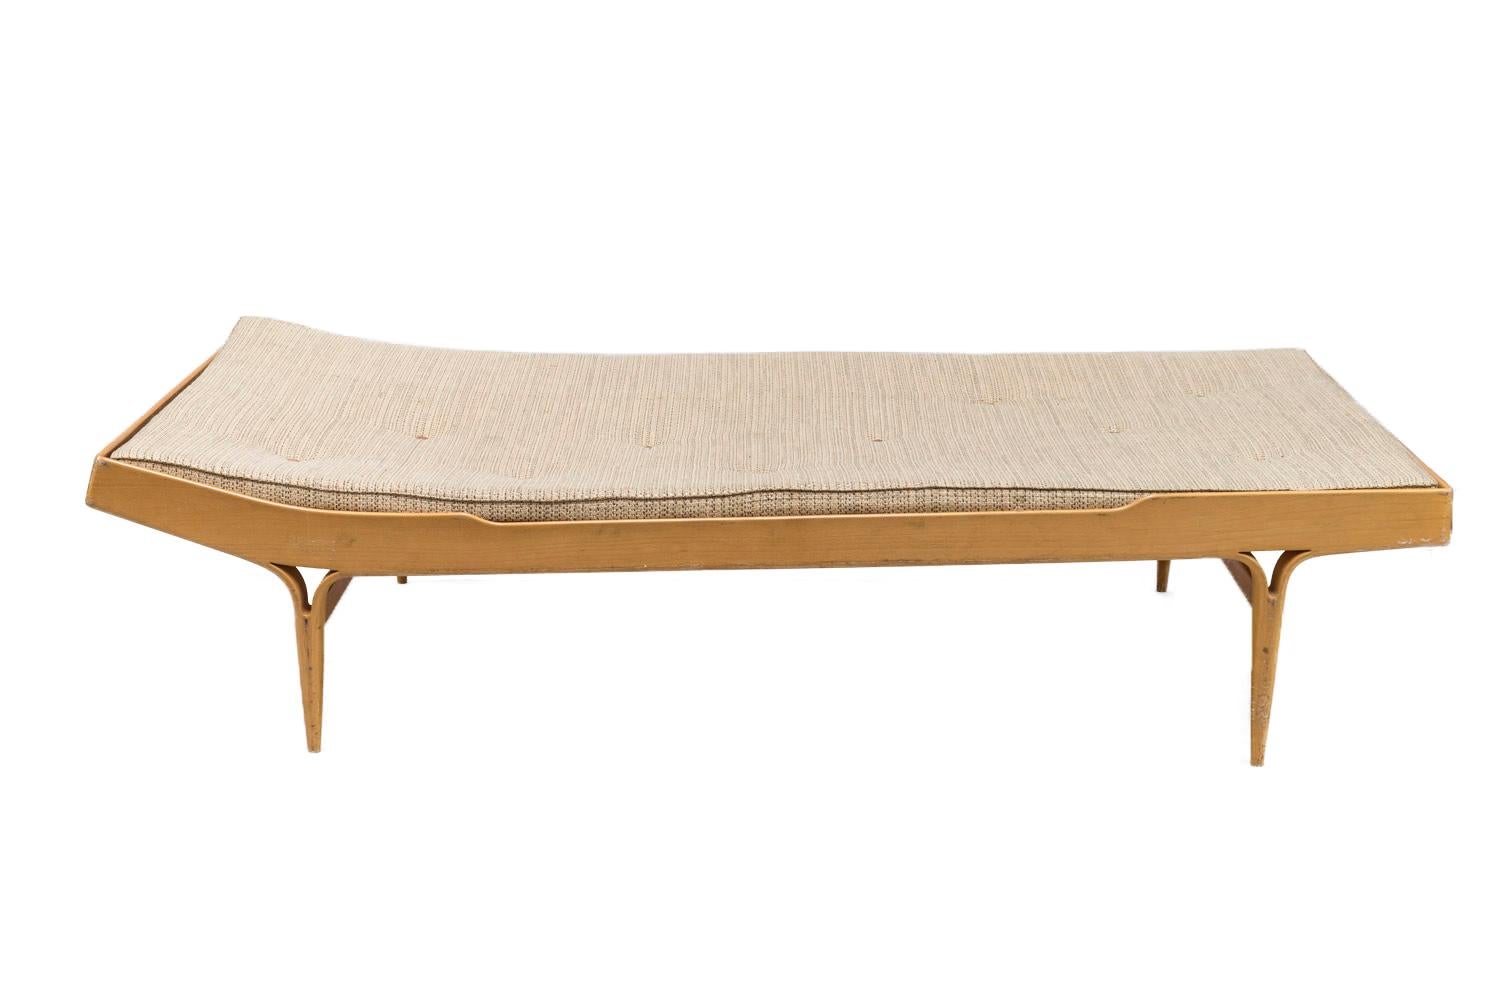 Bruno Mathsson, attributed to.

Berlin model of daybed in rectangular shaped stratified beech slightly elevated at the headboard. It stands on four fluted legs, which are fixed to the bed frame by two forks and linked each other by two